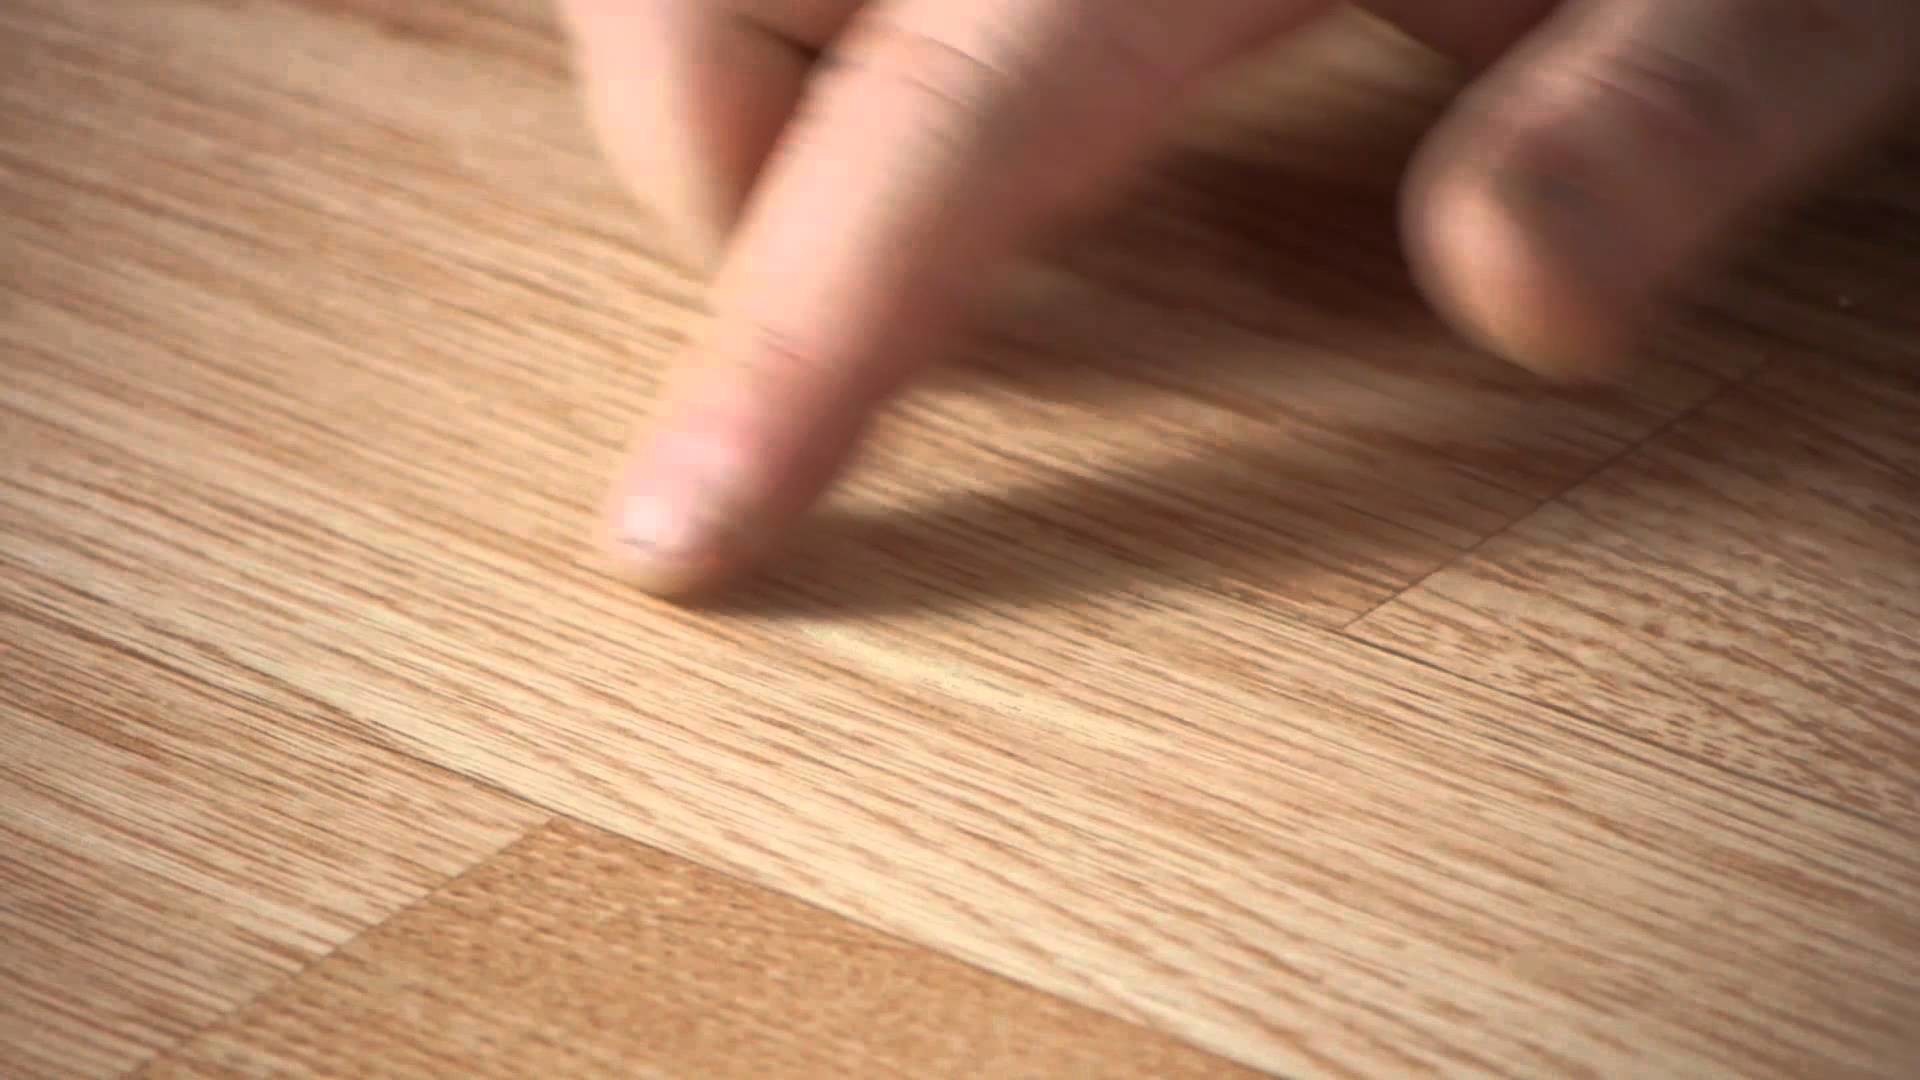 1920x1080 How to Repair Scratches in a Manufactured Hardwood Floor : Flooring Tips -  YouTube